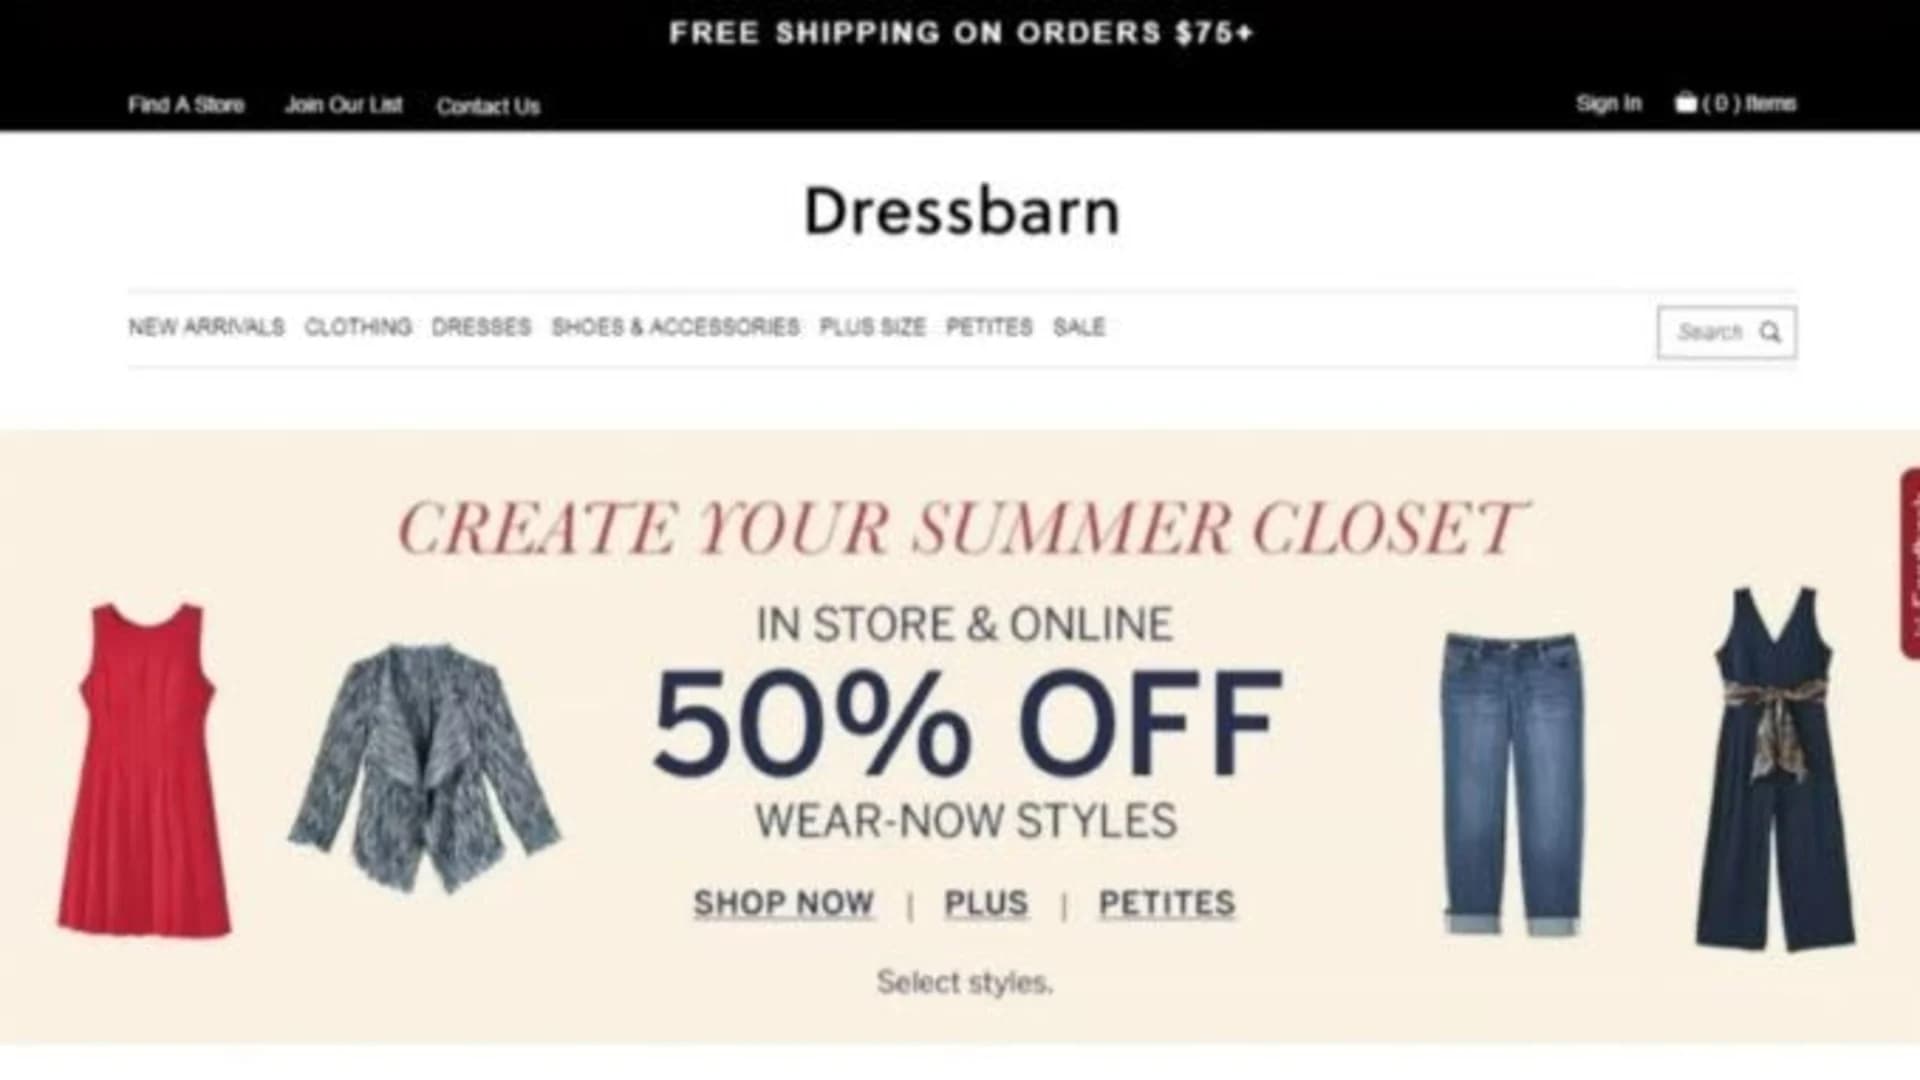 Dressbarn expects to have all its stores shut in early 2020